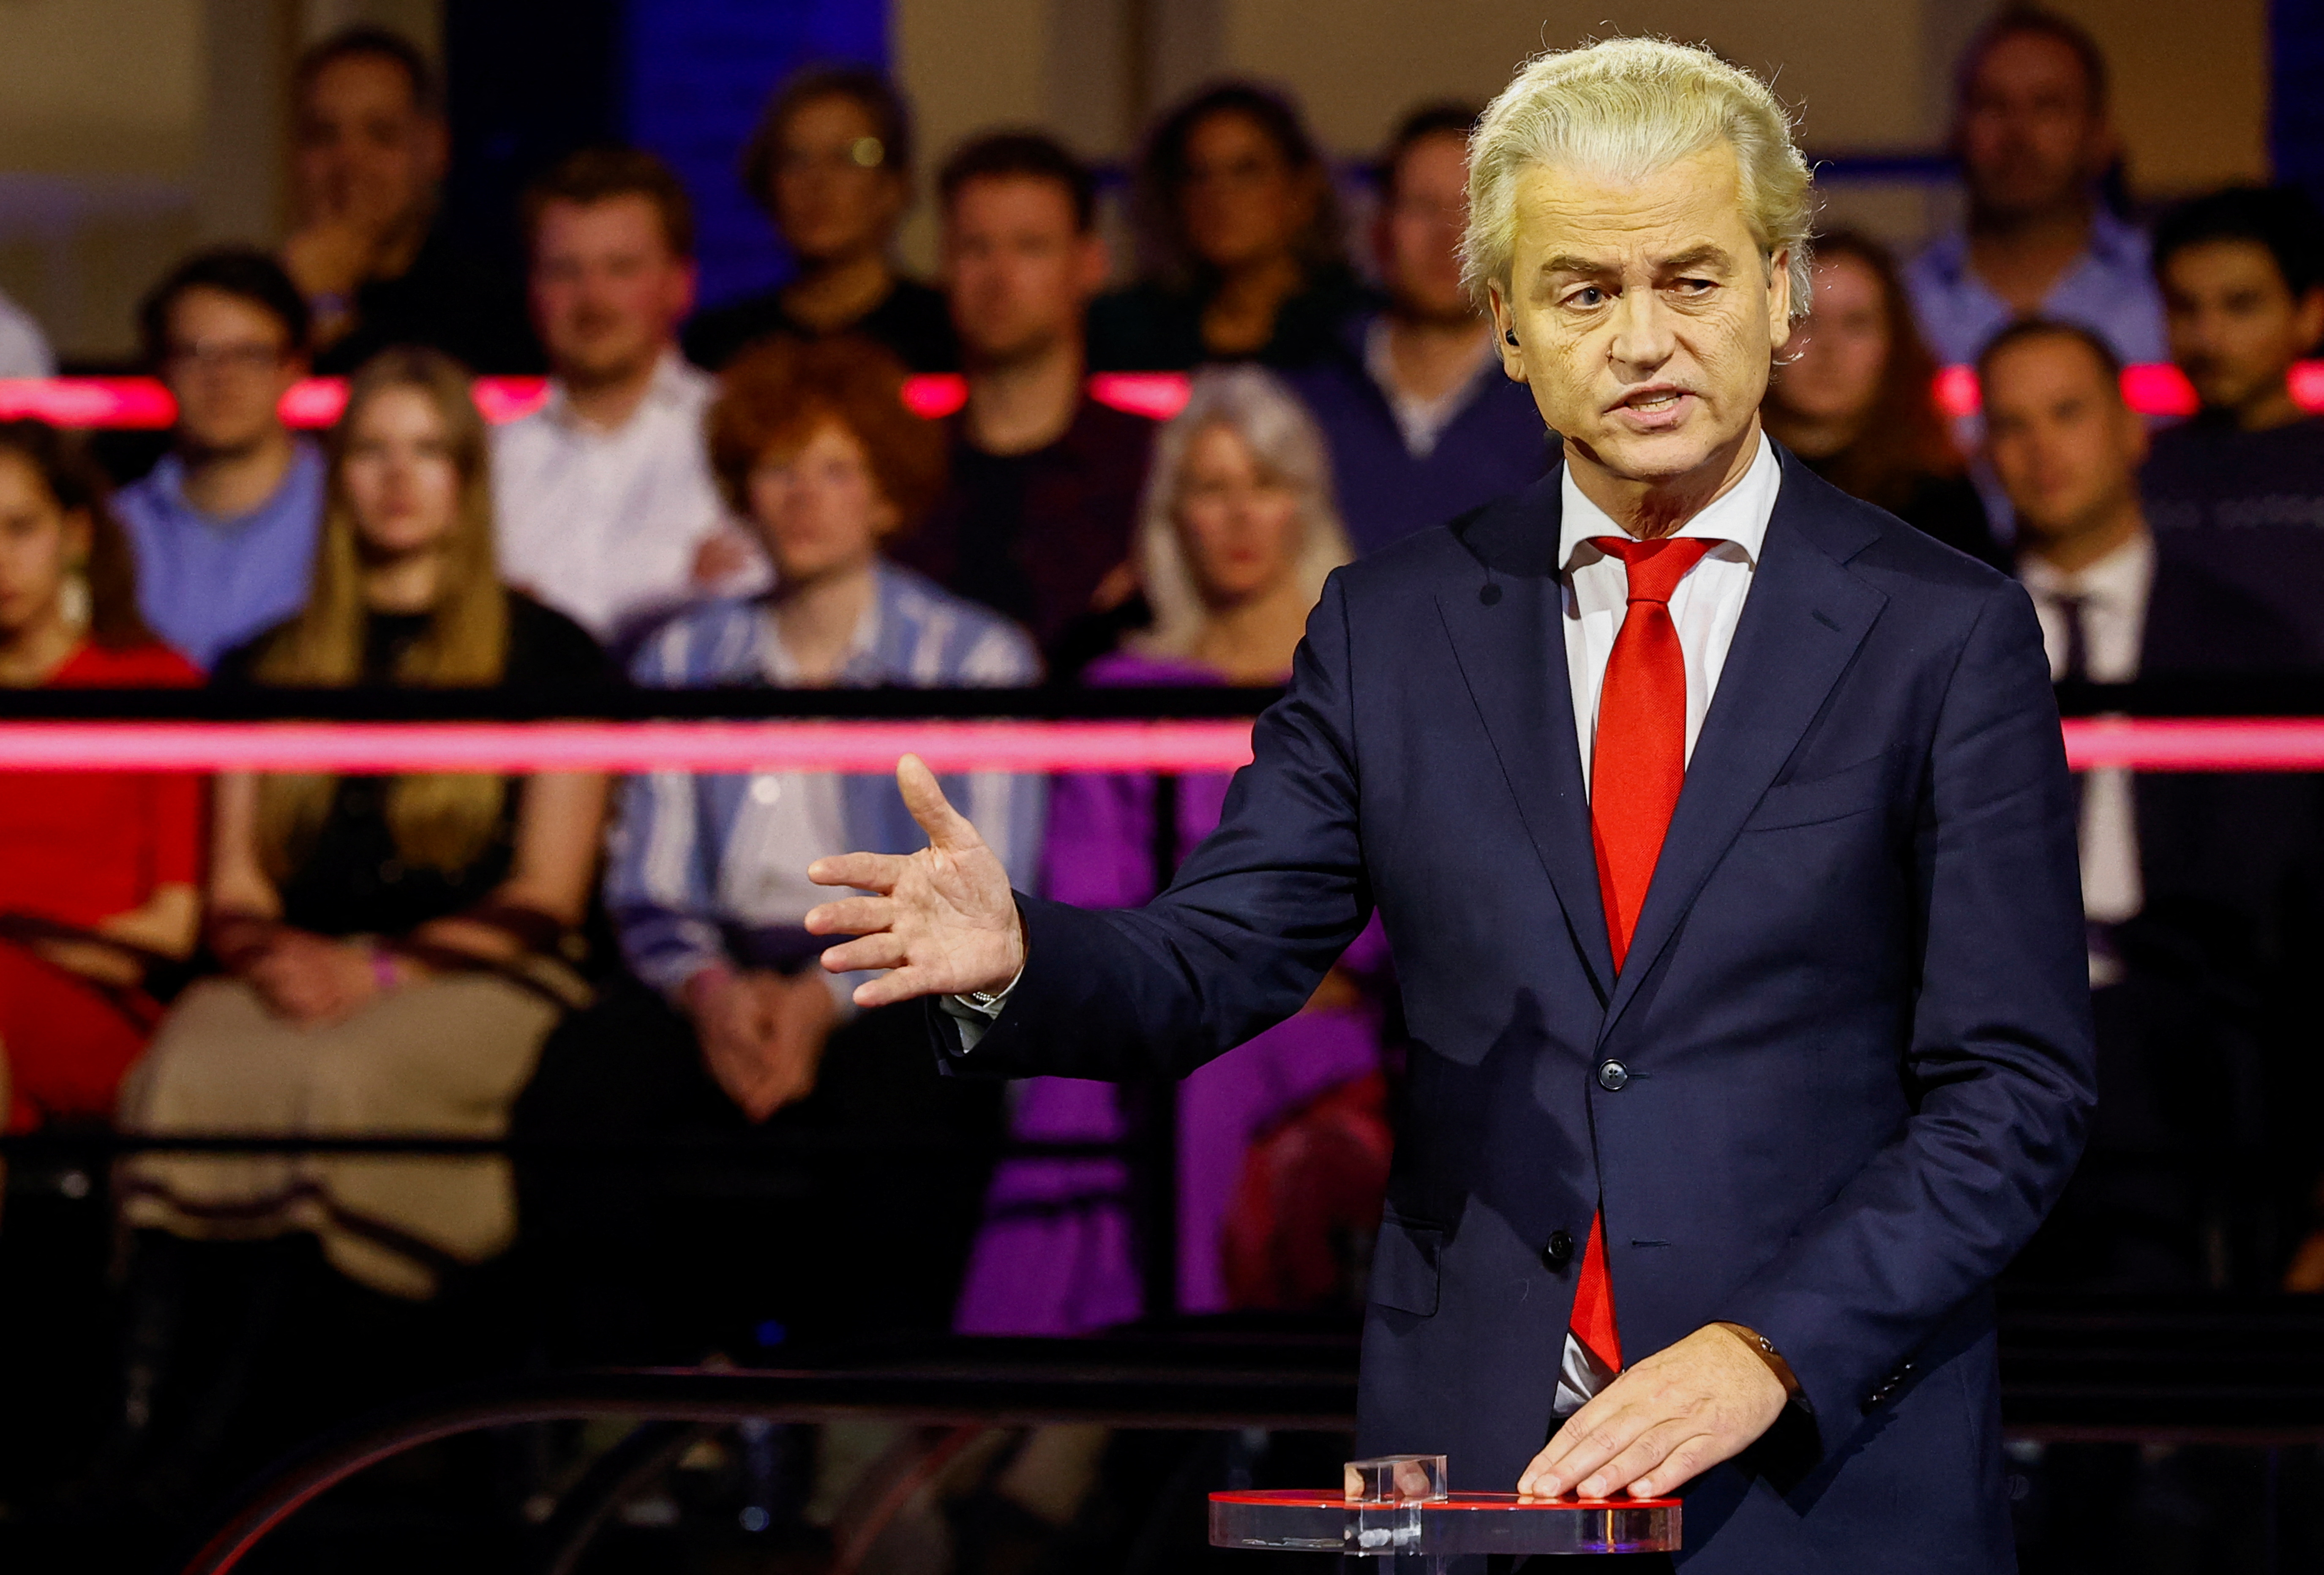 Wilders has been compared to former U.S. President Donald Trump for his shock of blonde hair and far-right views. /Piroschka van de Wouw/Reuters.